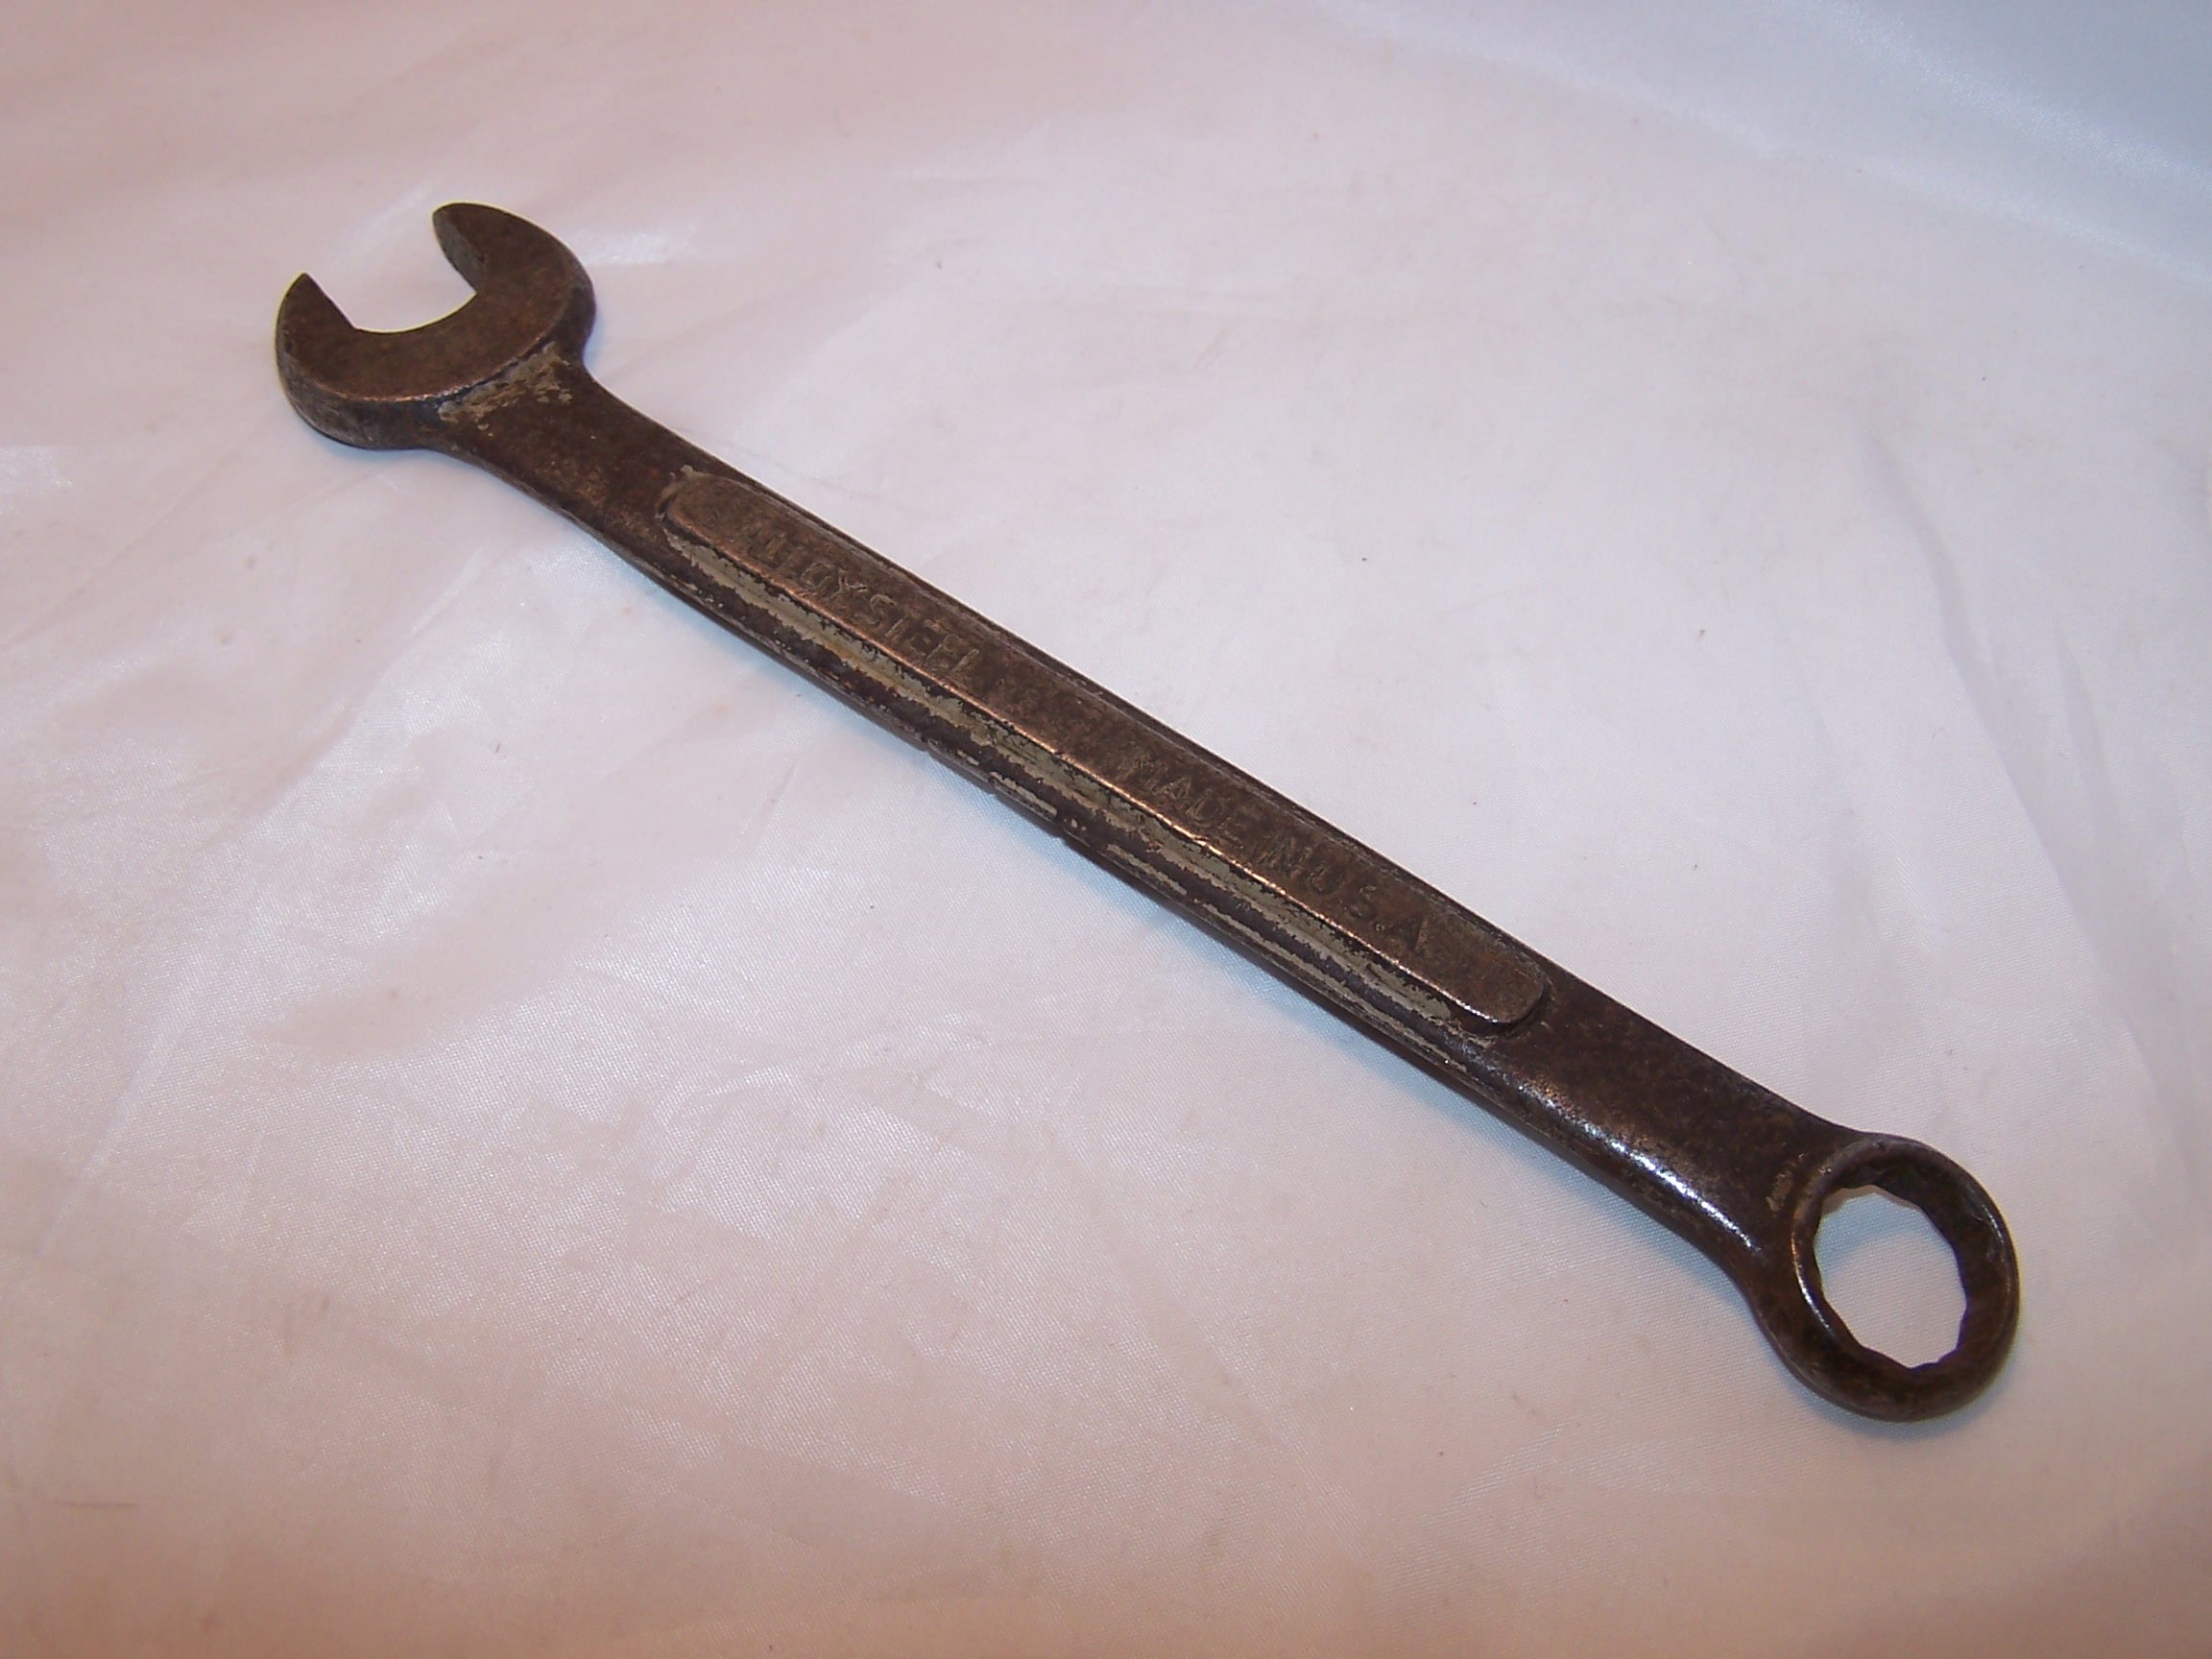 Vlchek Combination Wrench, WBE 20, Alloy Steel, Made in U.S.A., Vintage